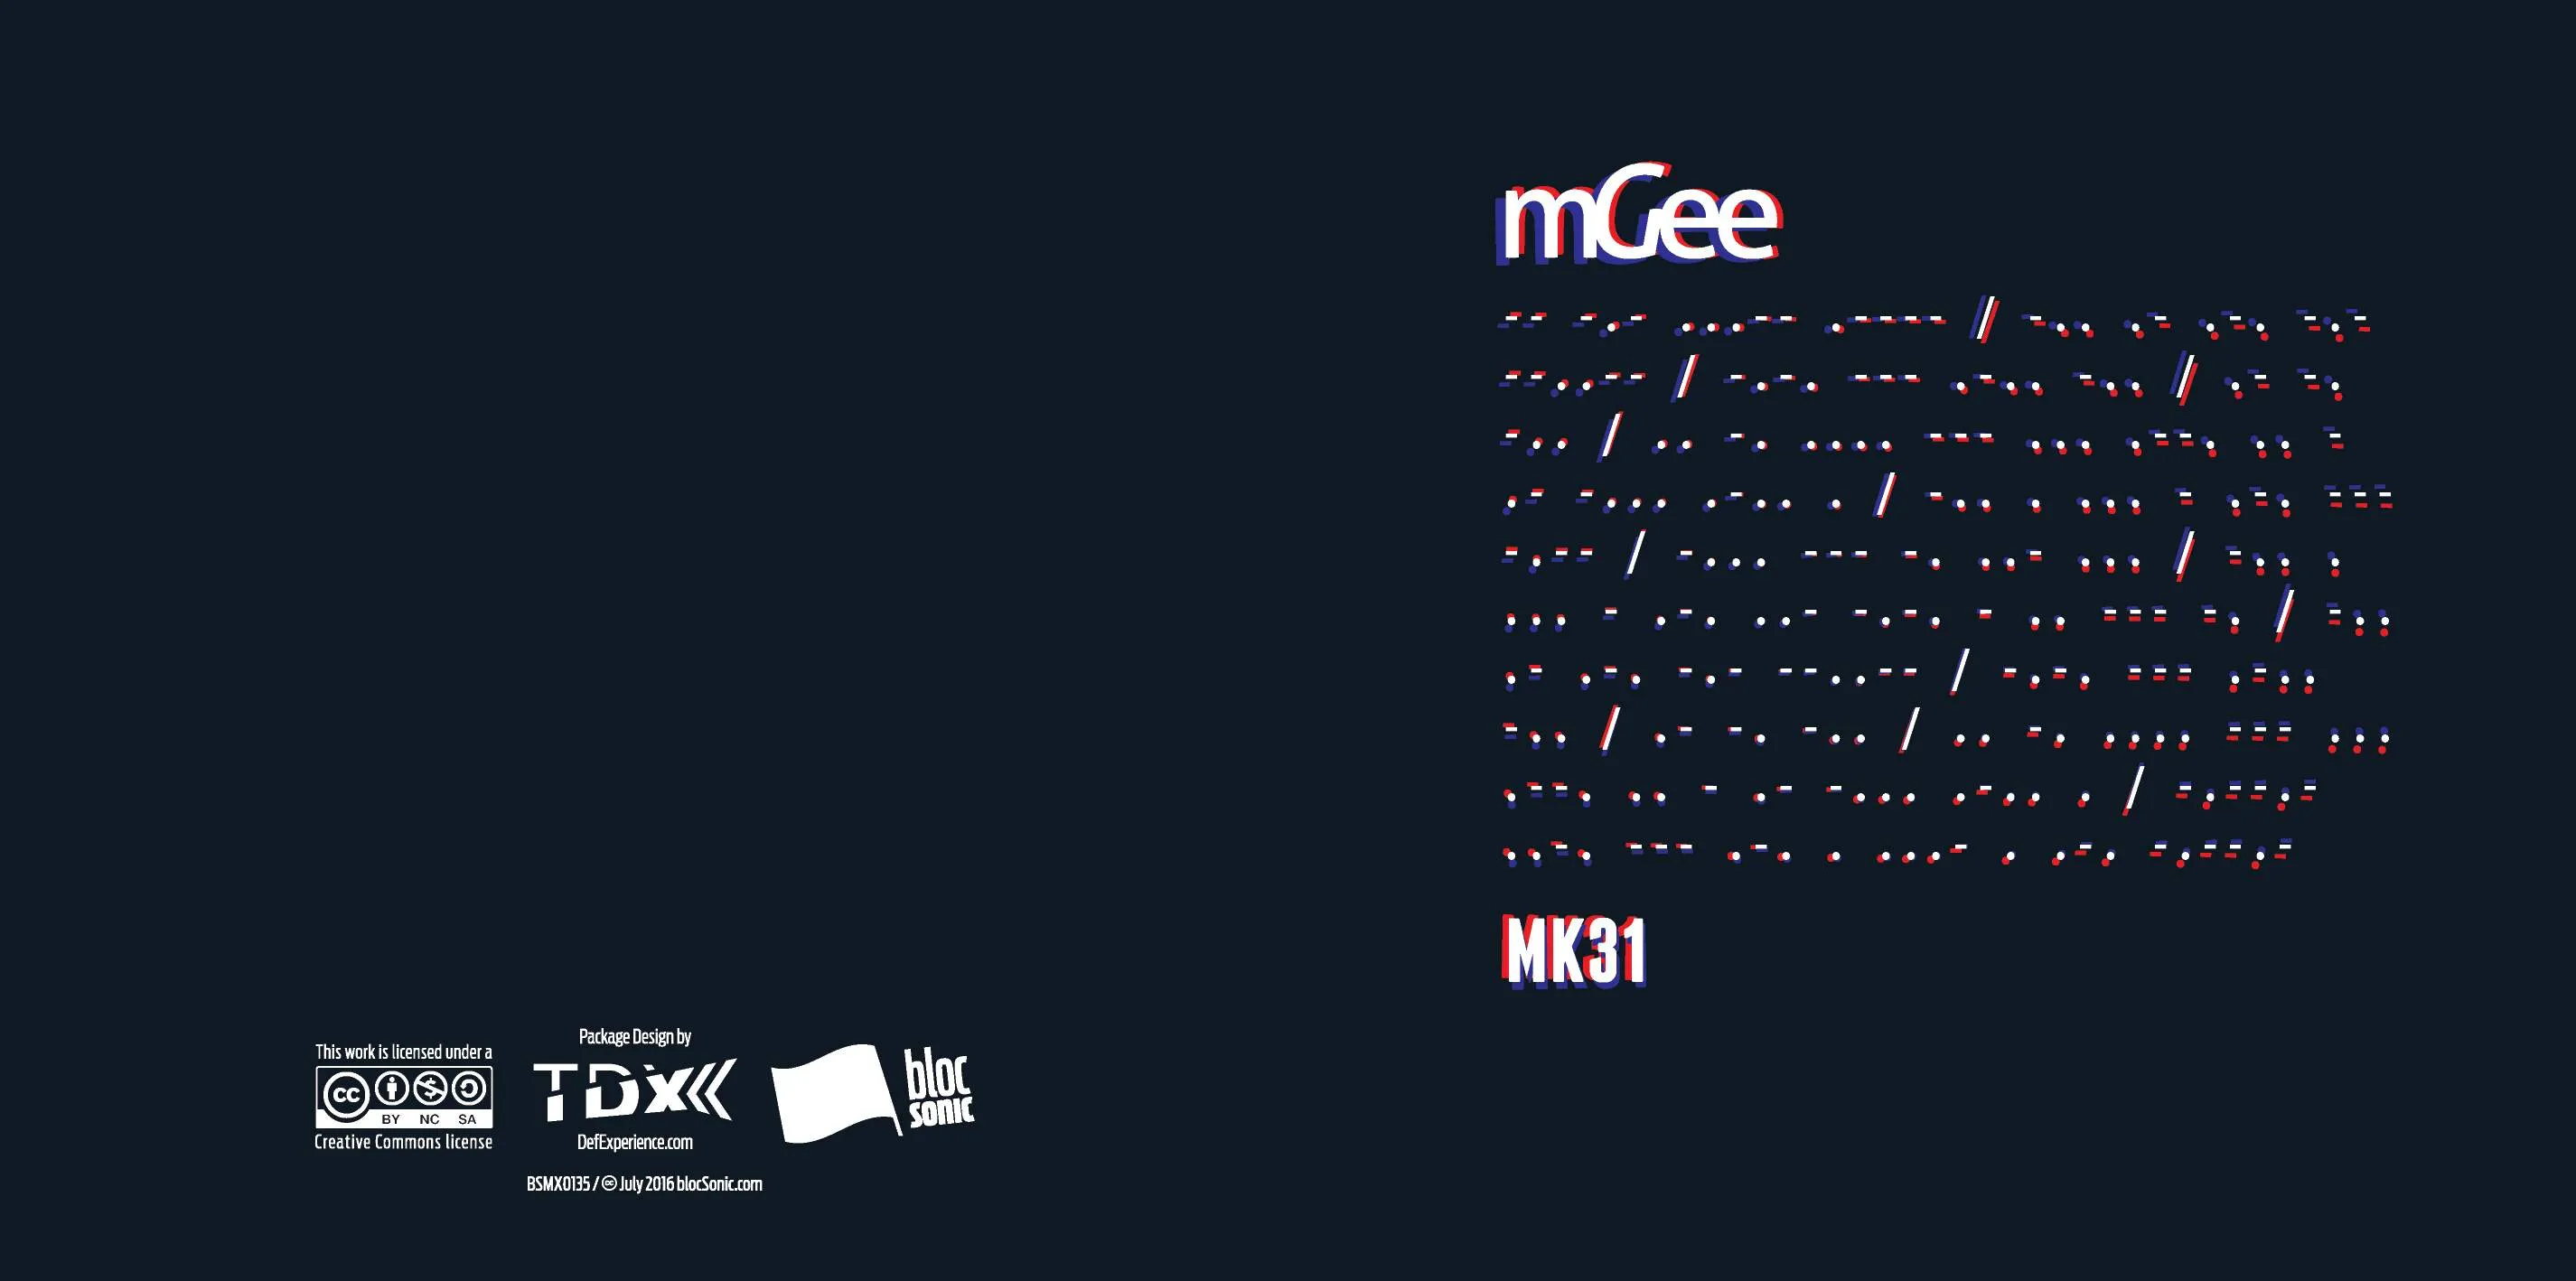 Album insert for “MK31” by mGee